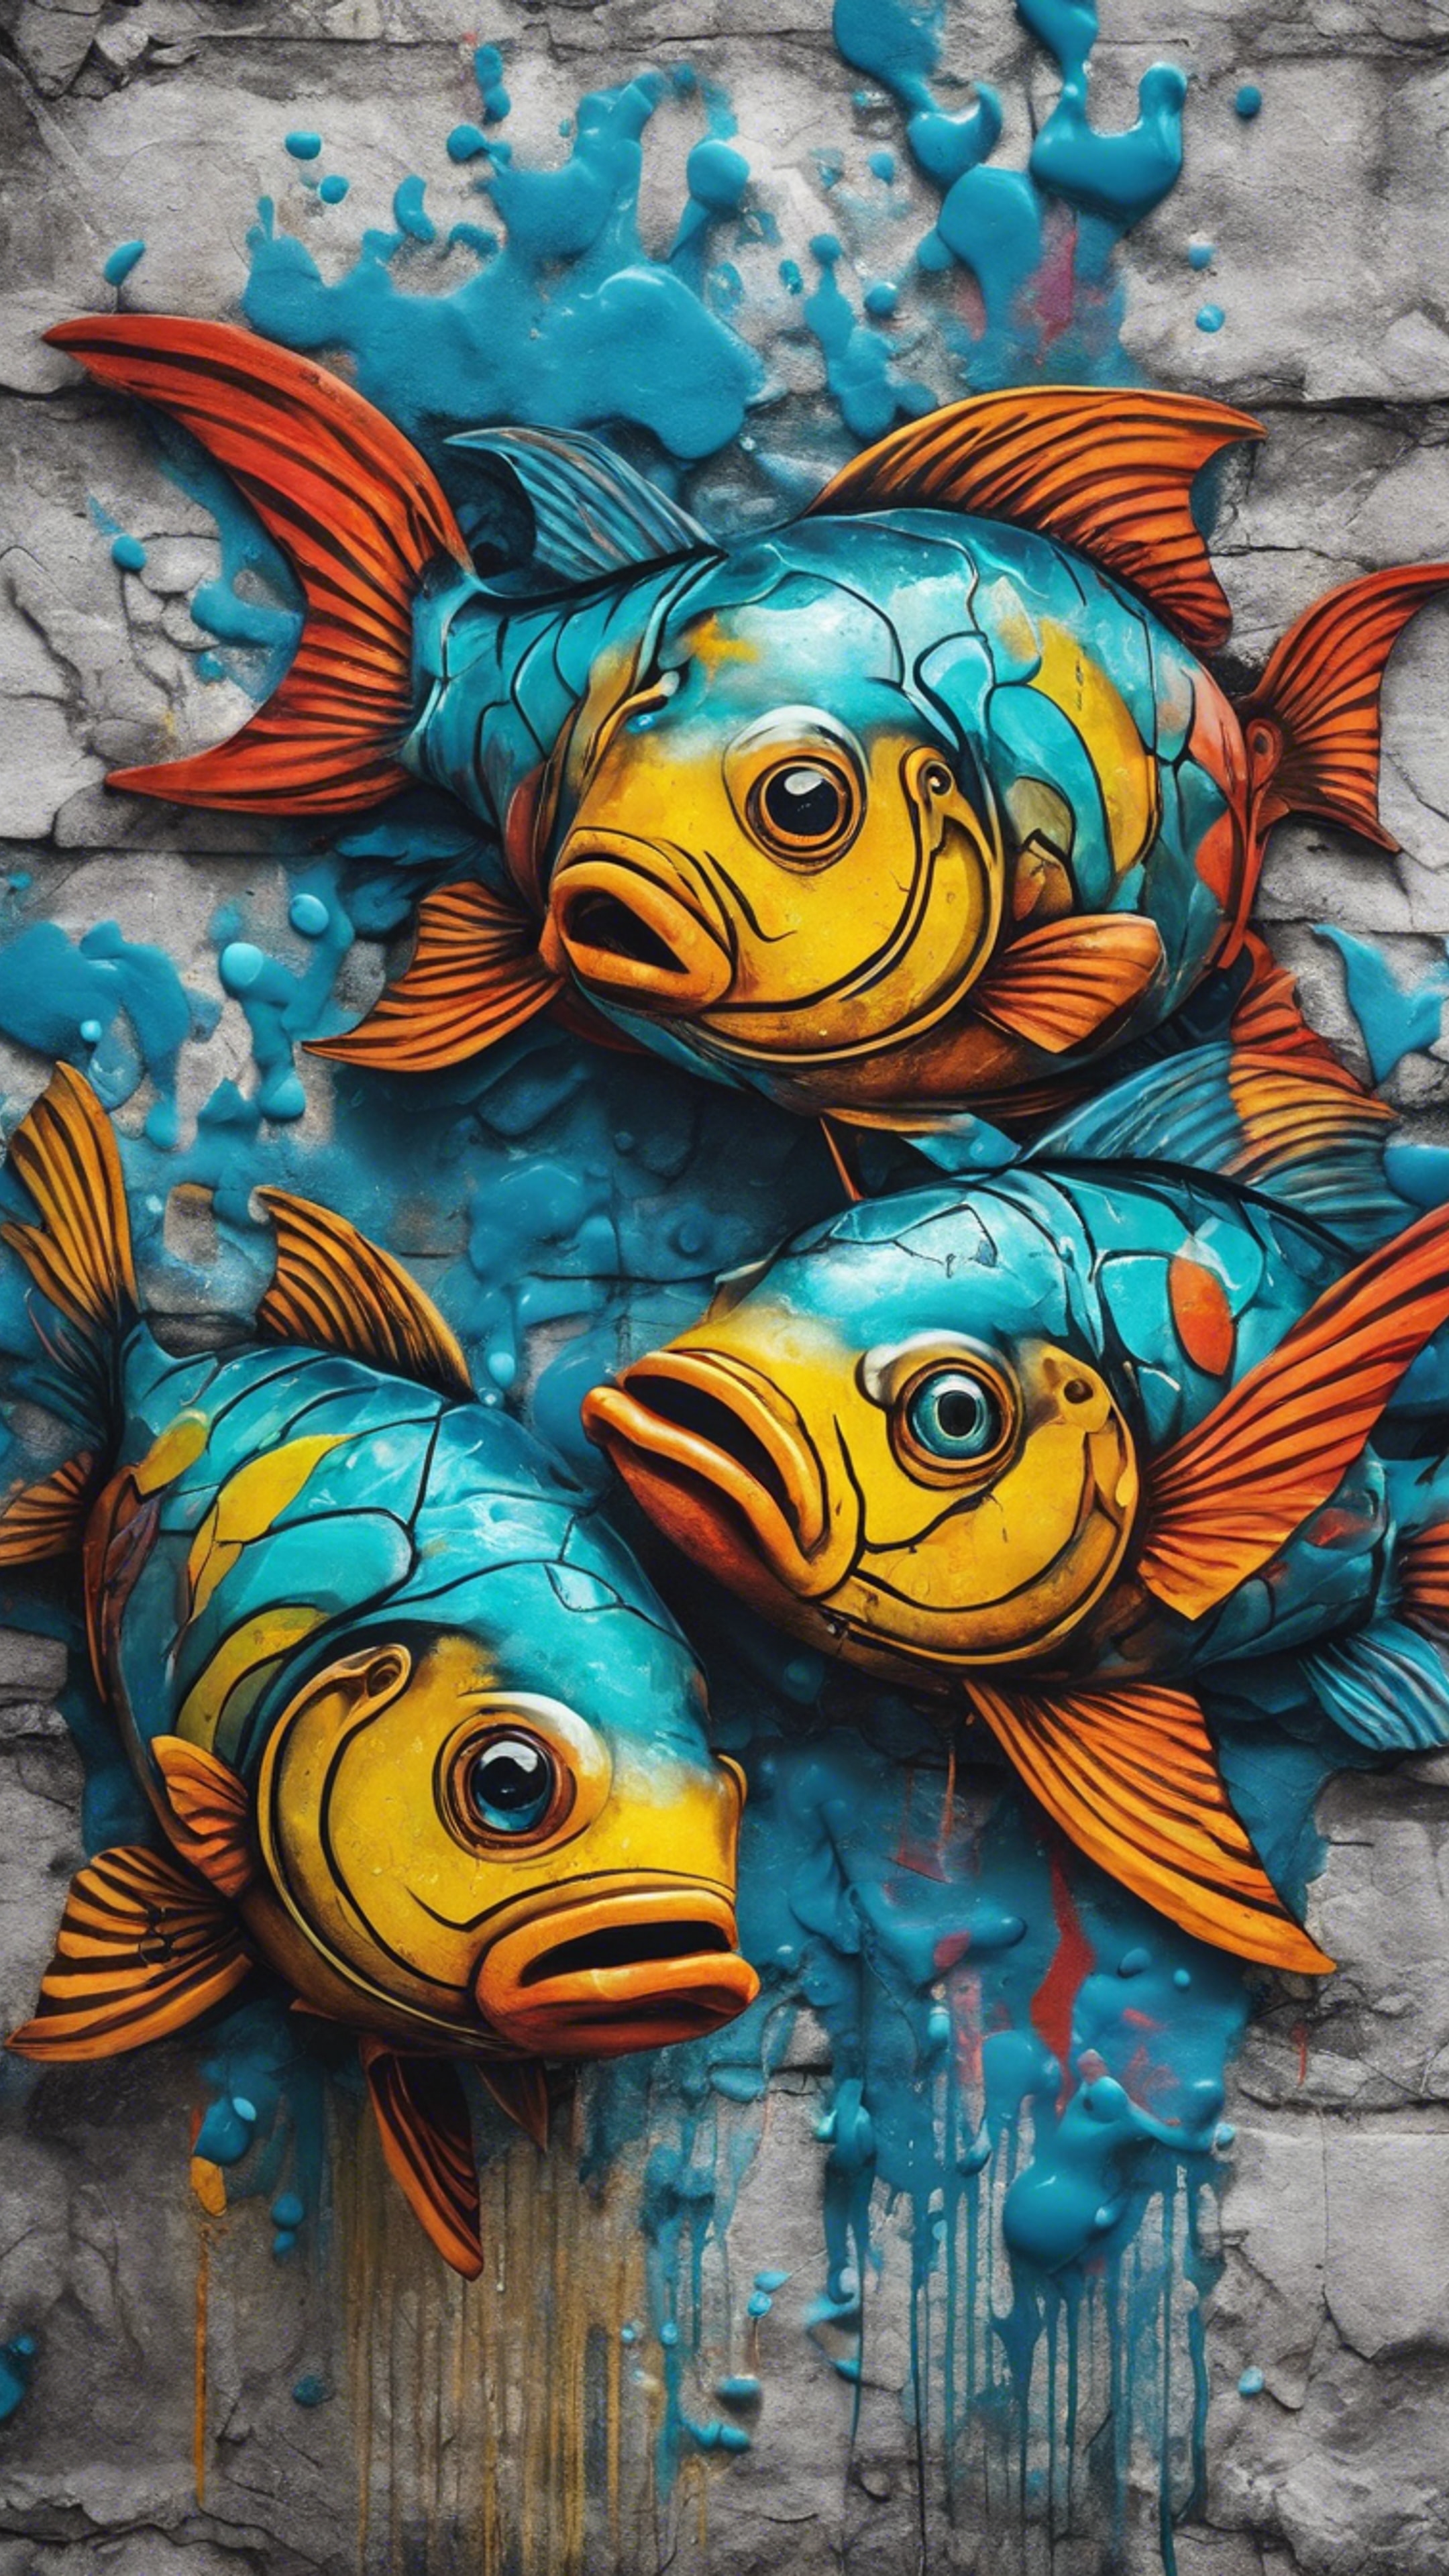 A vibrant street art depicting Pisces as two playful fish, on a textured wall with dynamic splashes of color. Ταπετσαρία[a1e08805c6ad437f94cb]